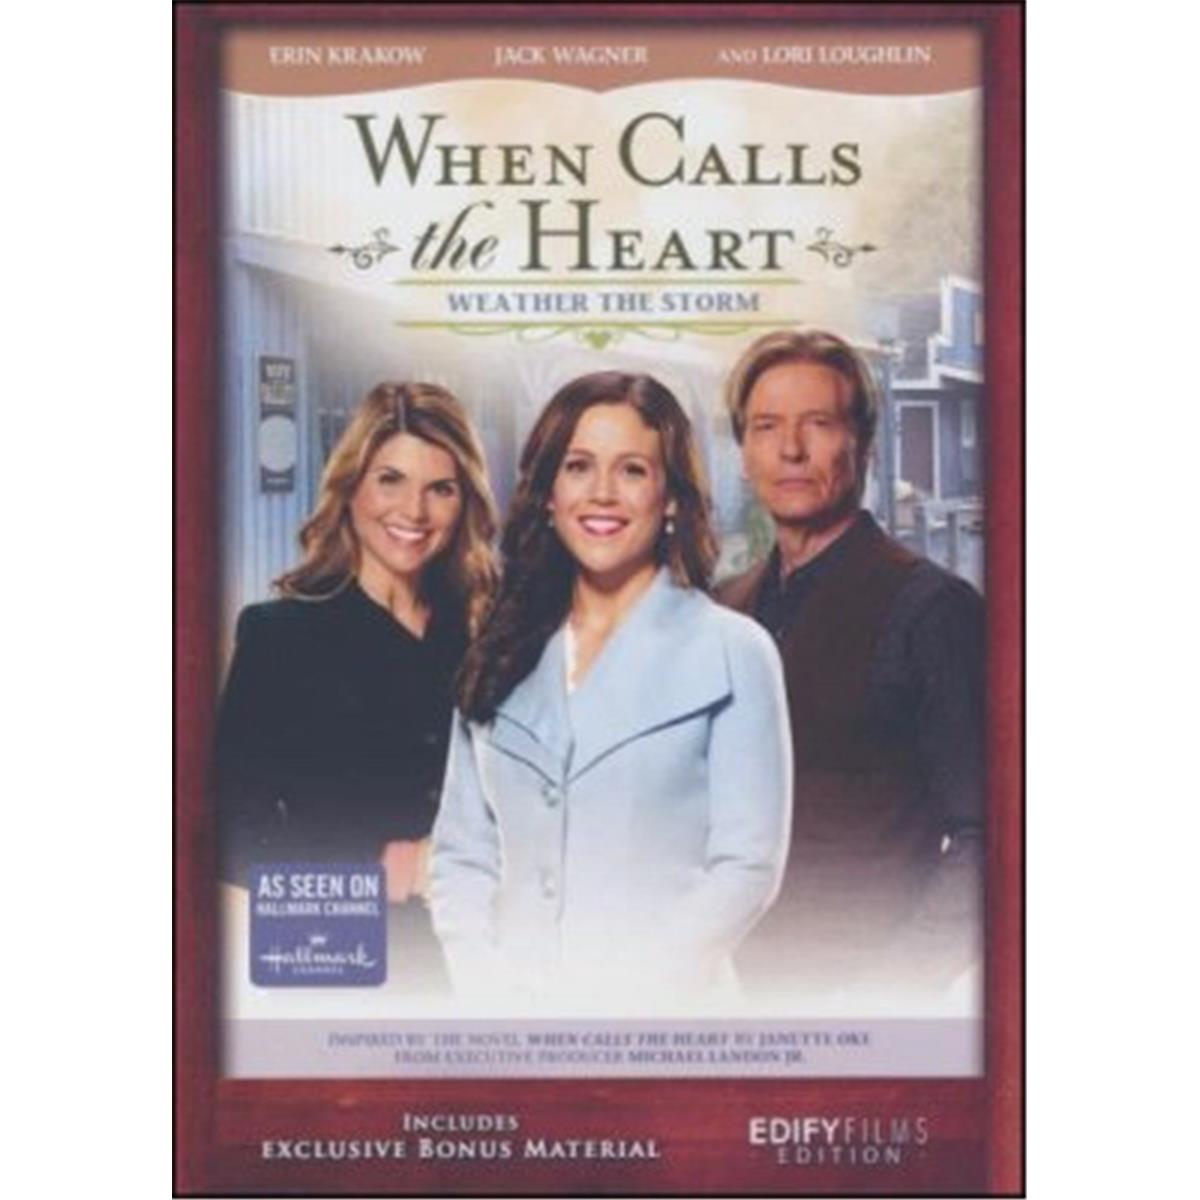 Picture of Edify Films 135190 DVD - When Calls the Heart Weather the Storm - Season 5 DVD 5